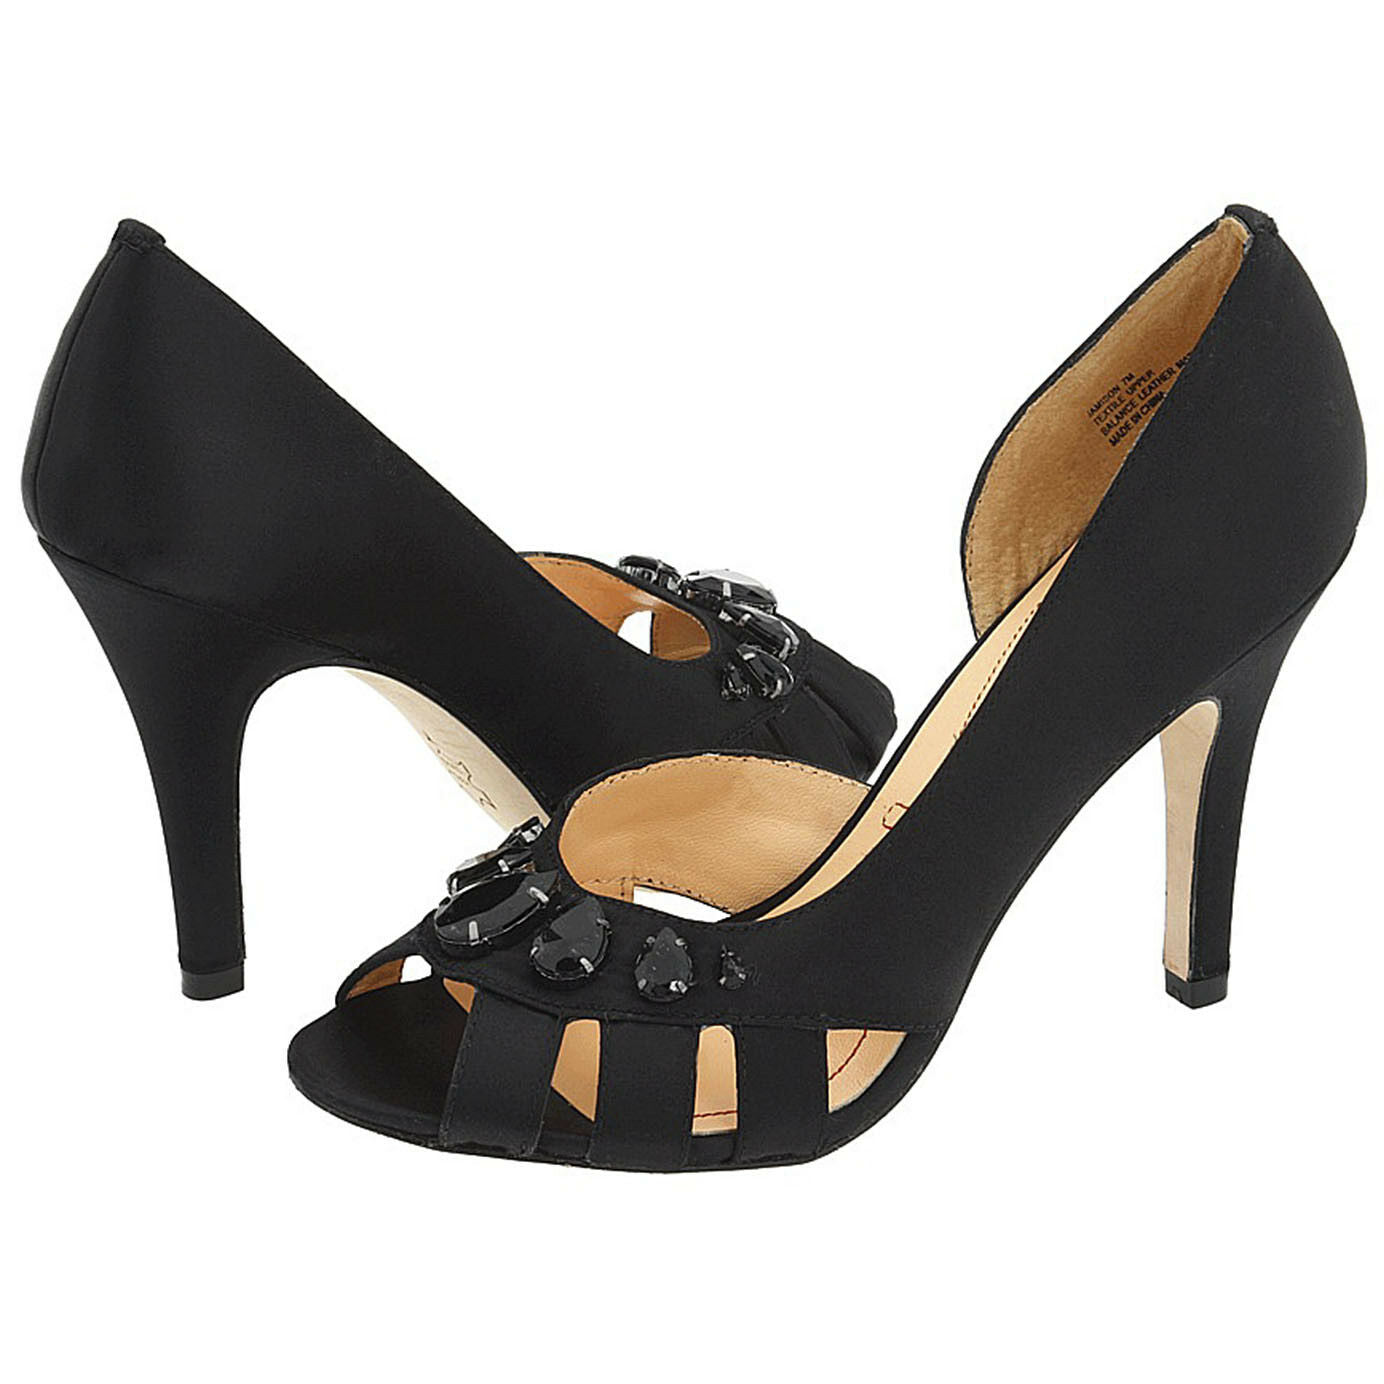 Glamorous heeled sandals with gold cut out heel in black | ASOS